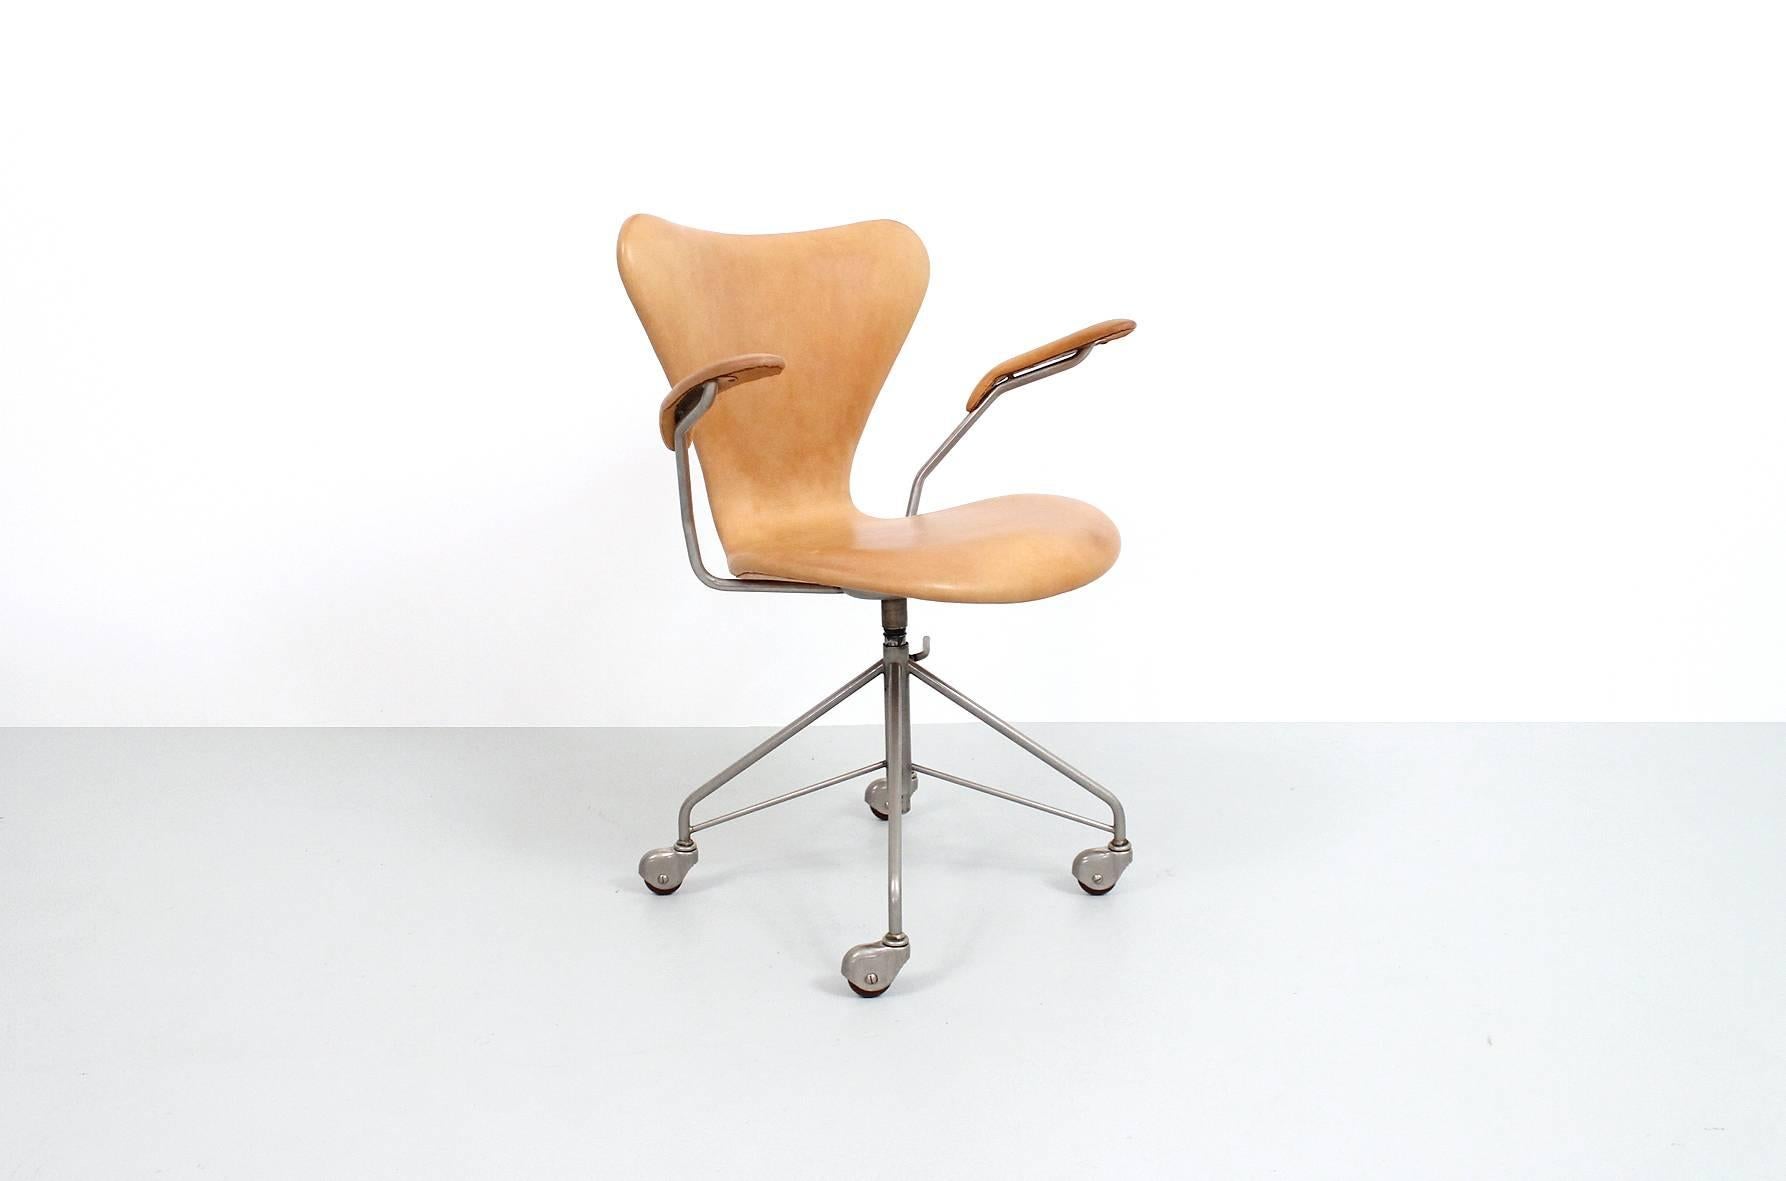 Early model 3117 leather Sevener office or desk chair by Arne Jacobsen for Fritz Hansen. Chair swivels and adjusts for height.